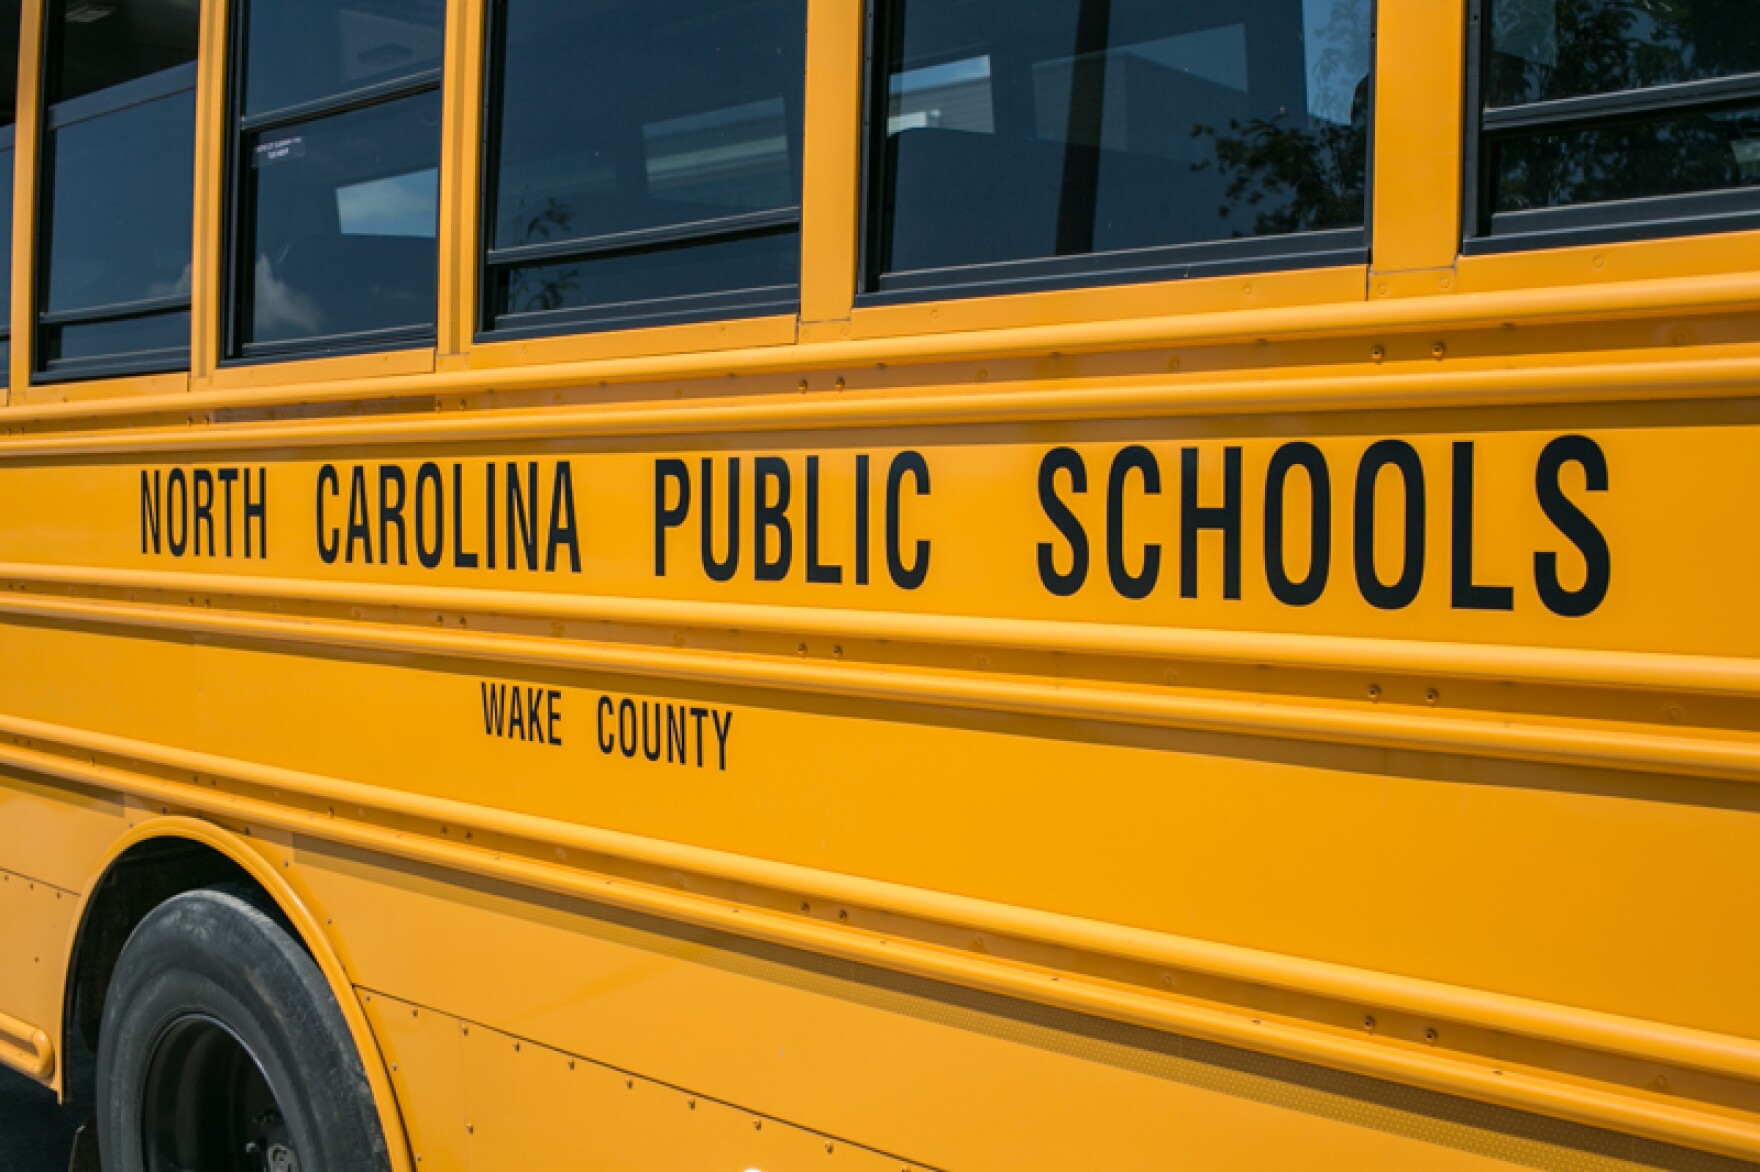 The side of a yellow-orange school bus that reads "North Carolina Public Schools" and "Wake County"